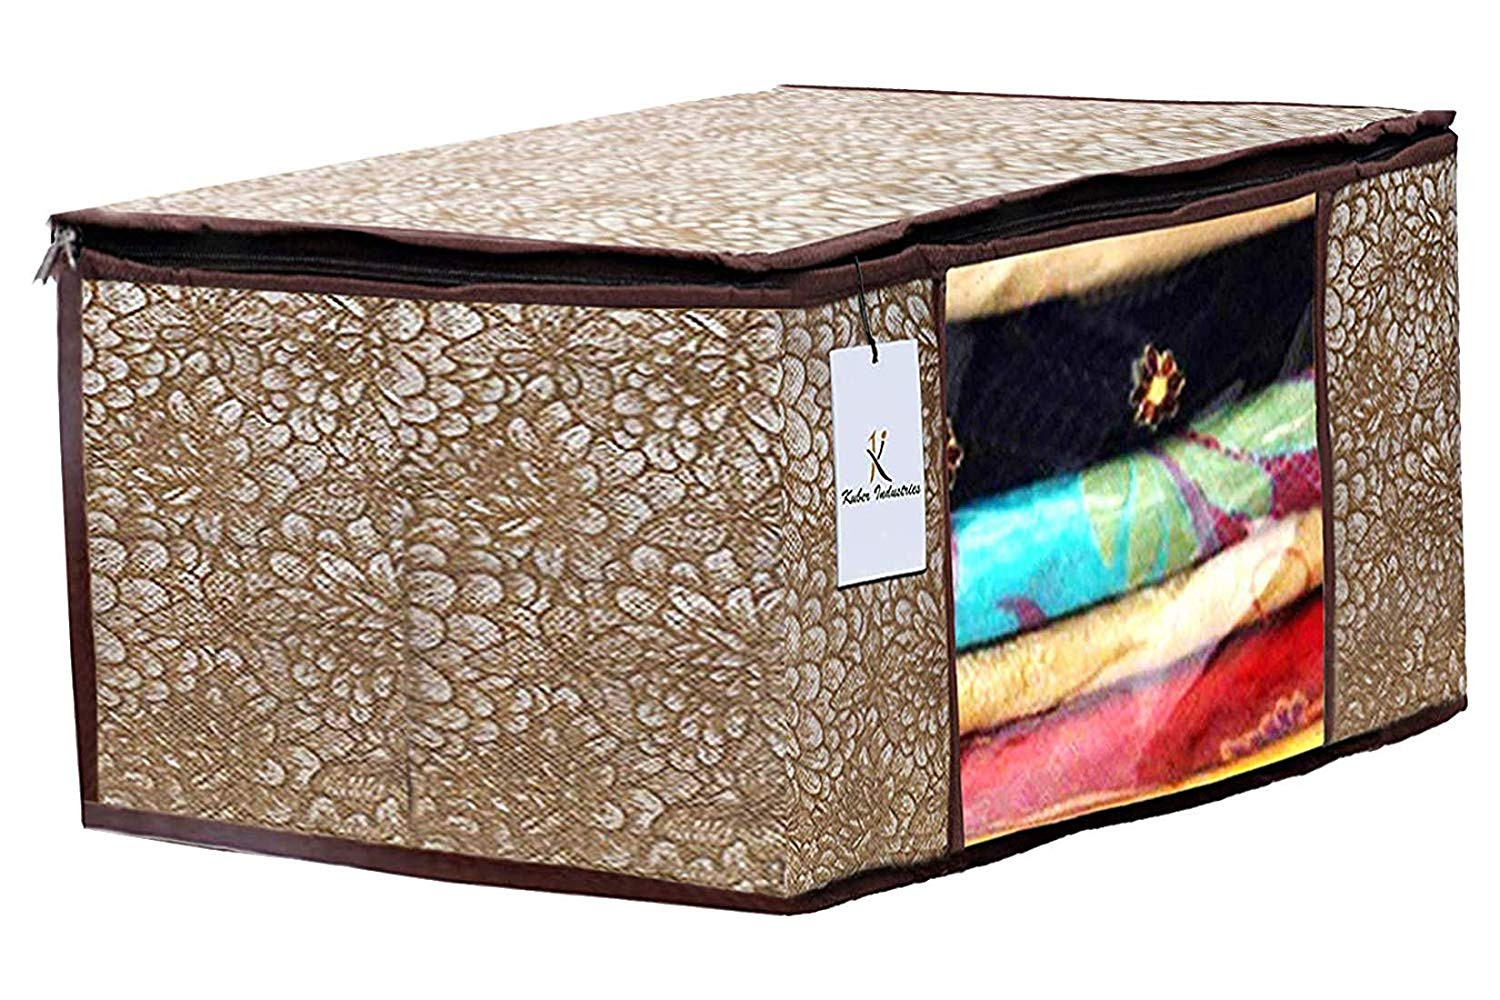 Kuber Industries Metallic Printed Non Woven Saree Cover And Underbed Storage Bag, Cloth Organizer For Storage, Blanket Cover Combo Set (Gold & Brown) -CTKTC38595